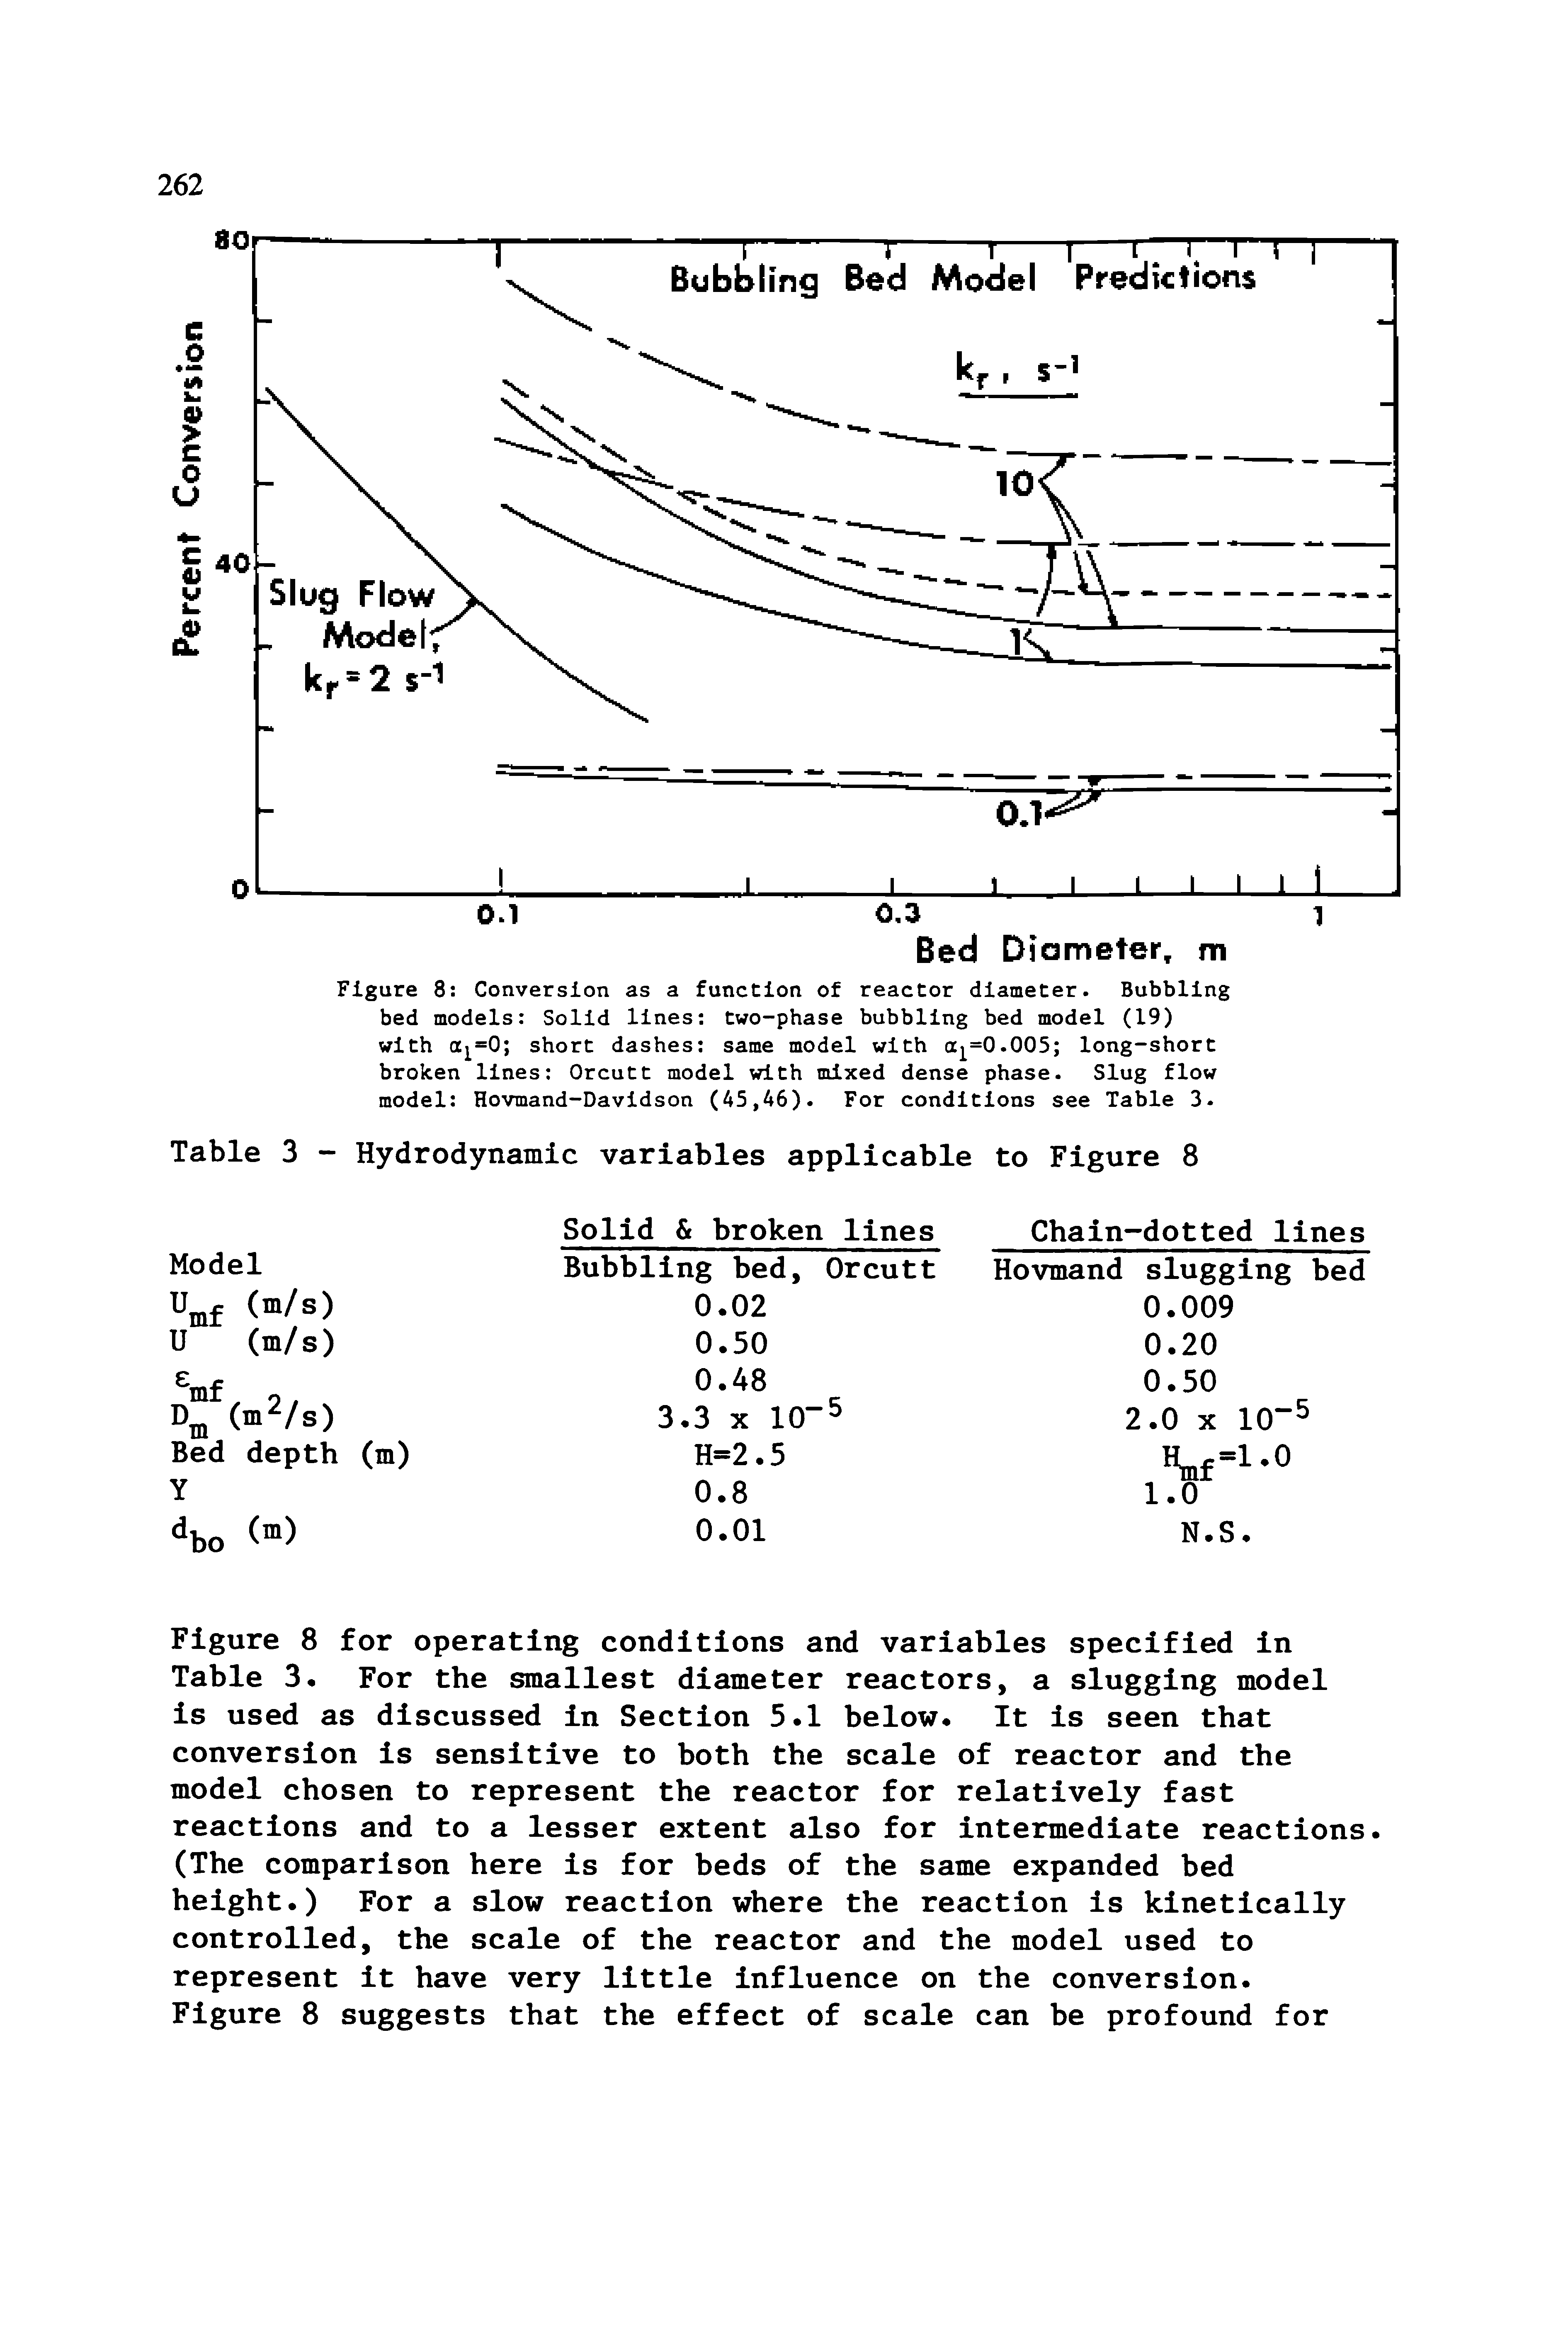 Figure 8 Conversion as a function of reactor diameter. Bubbling bed models Solid lines two-phase bubbling bed model (19) with a =0 short dashes same model with =0.005 long-short broken lines Orcutt model with mixed dense phase. Slug flow model Hovmand-Davidson (A5,46). For conditions see Table 3.